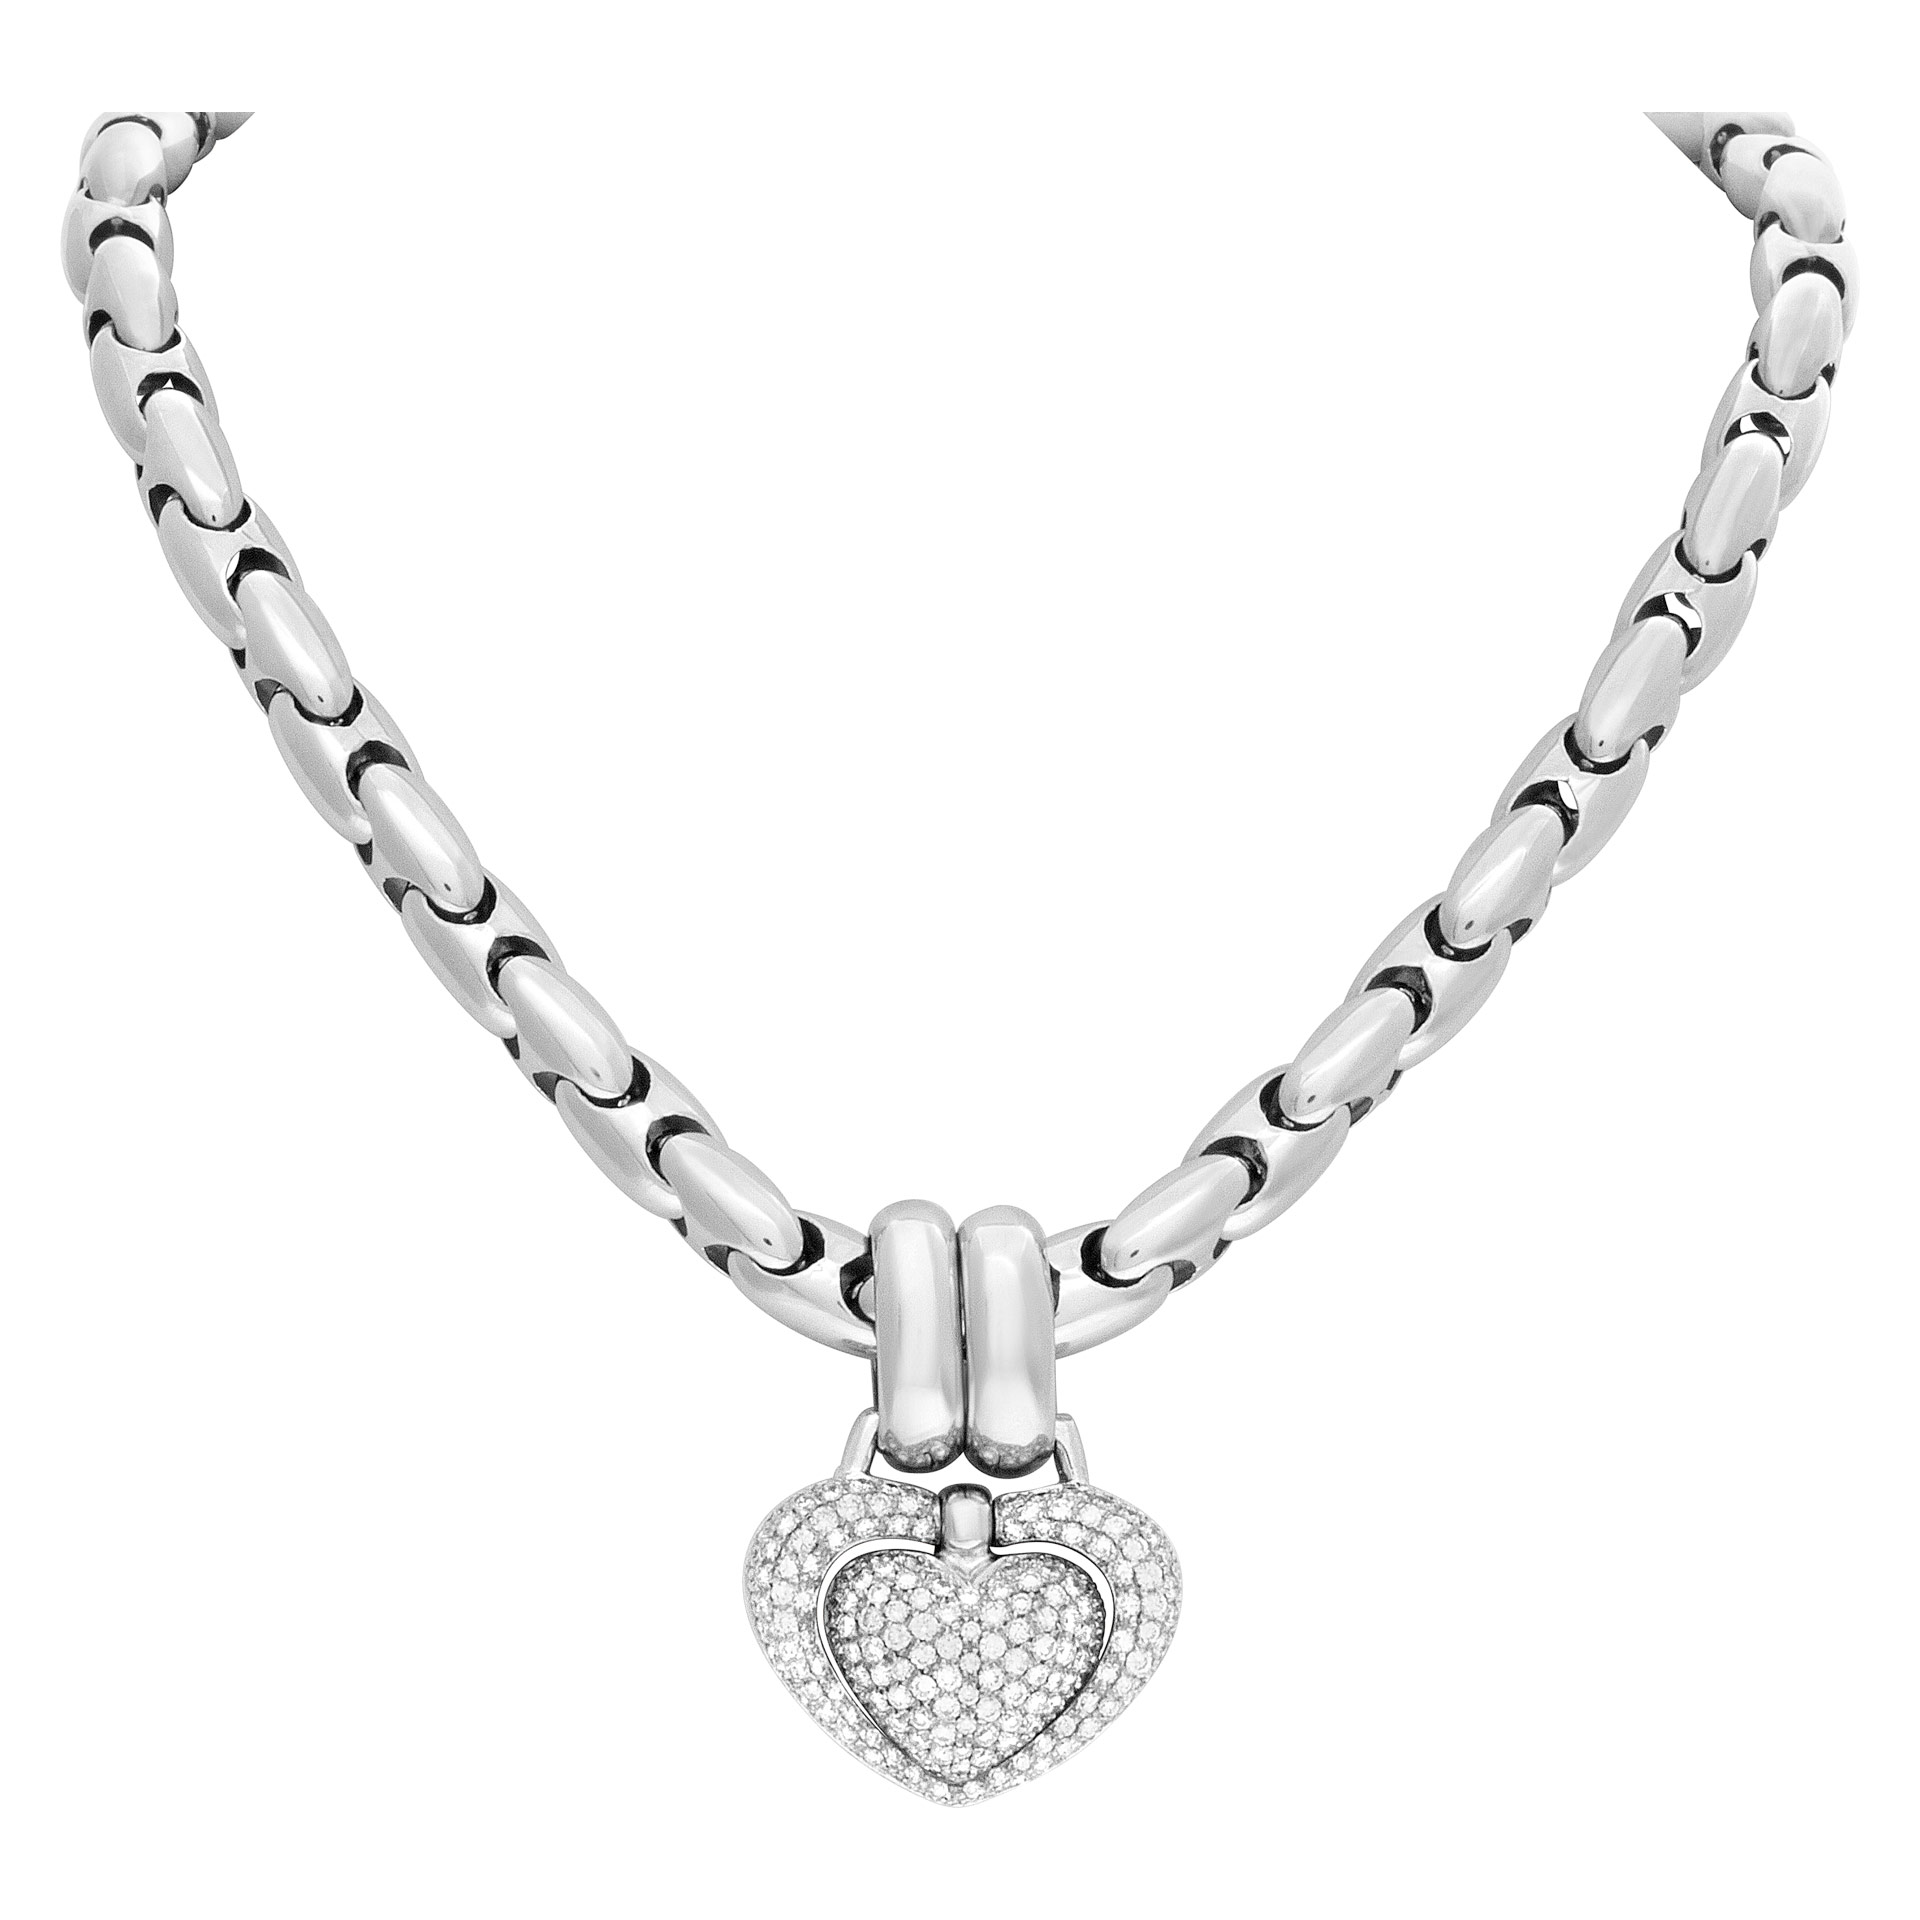 Chimento necklace in 18k white gold 2.50 cts in diamonds (G-H color, VS clarity) image 1